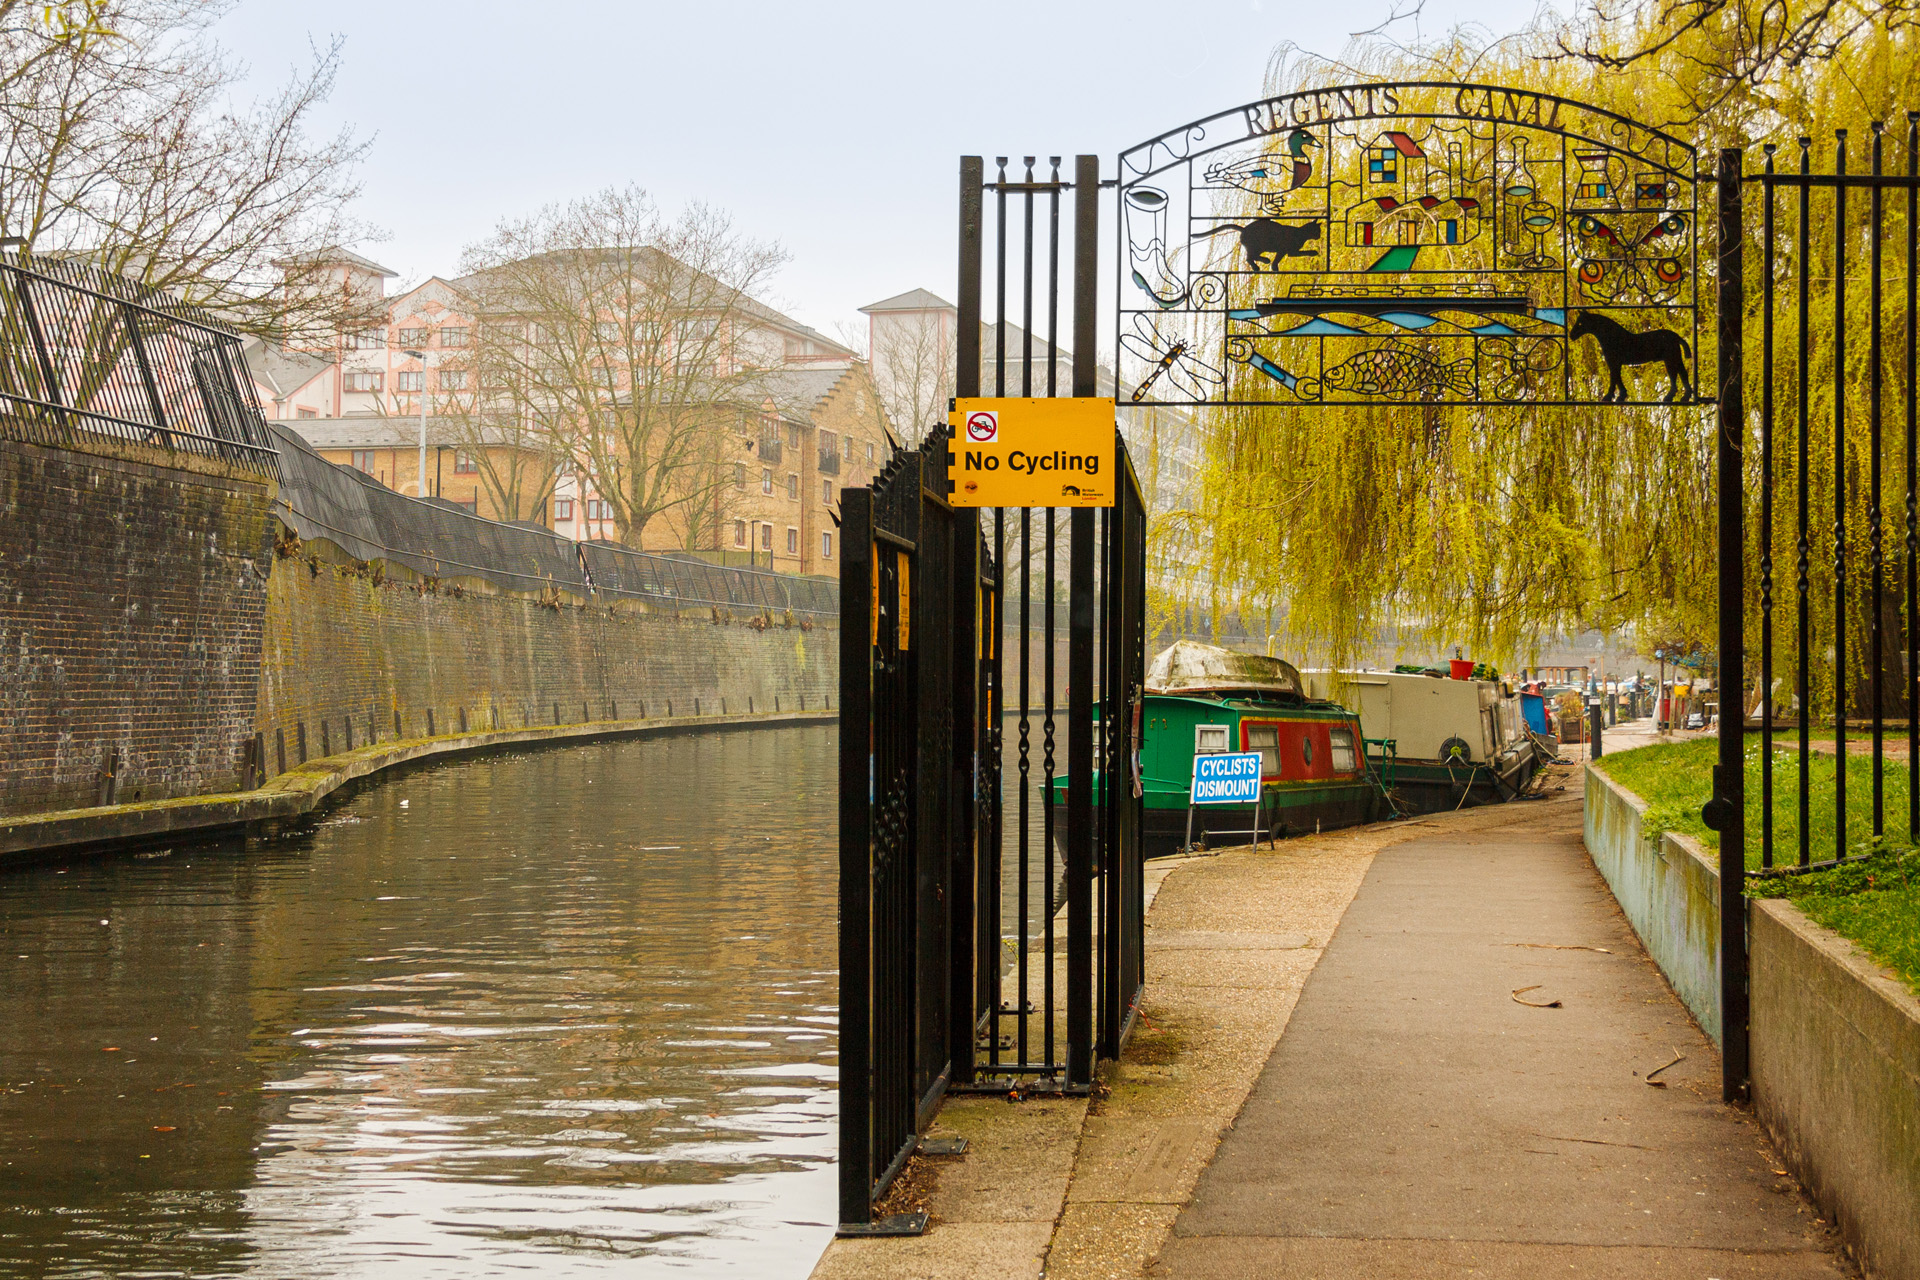 Entrance to the Regent's Canal walk